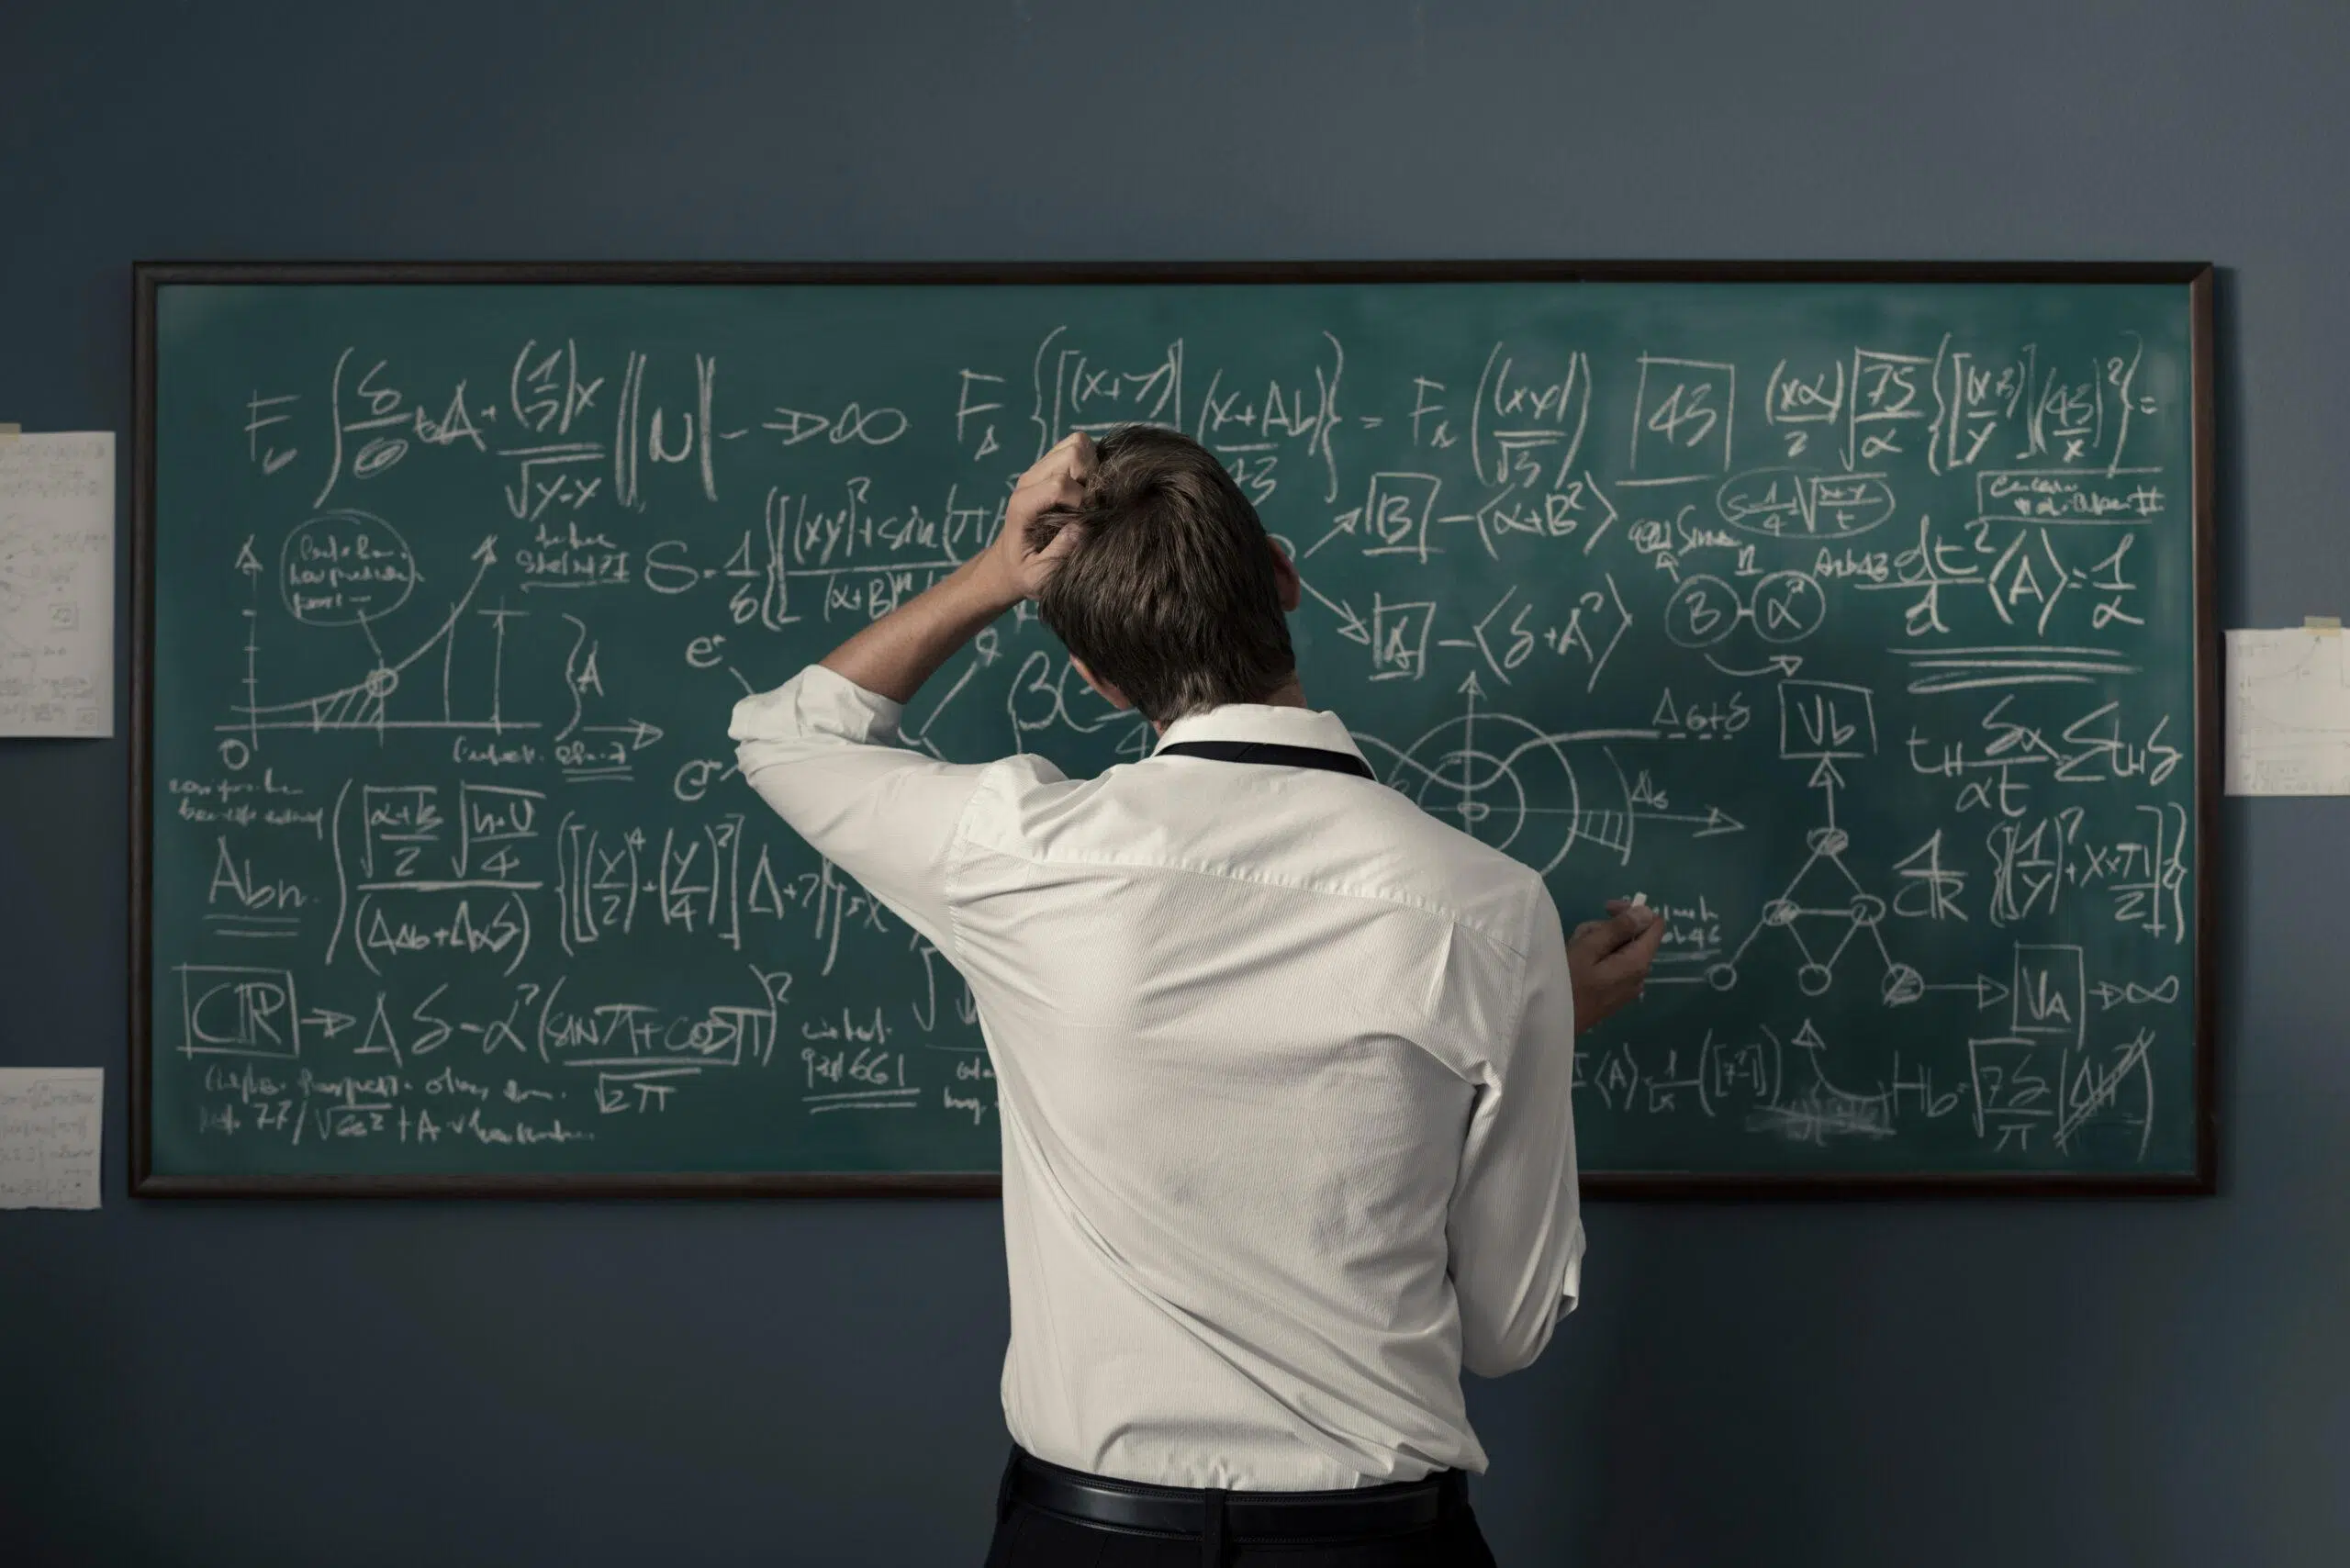 Mathematician solving problems and writing formulas on the chalkboard